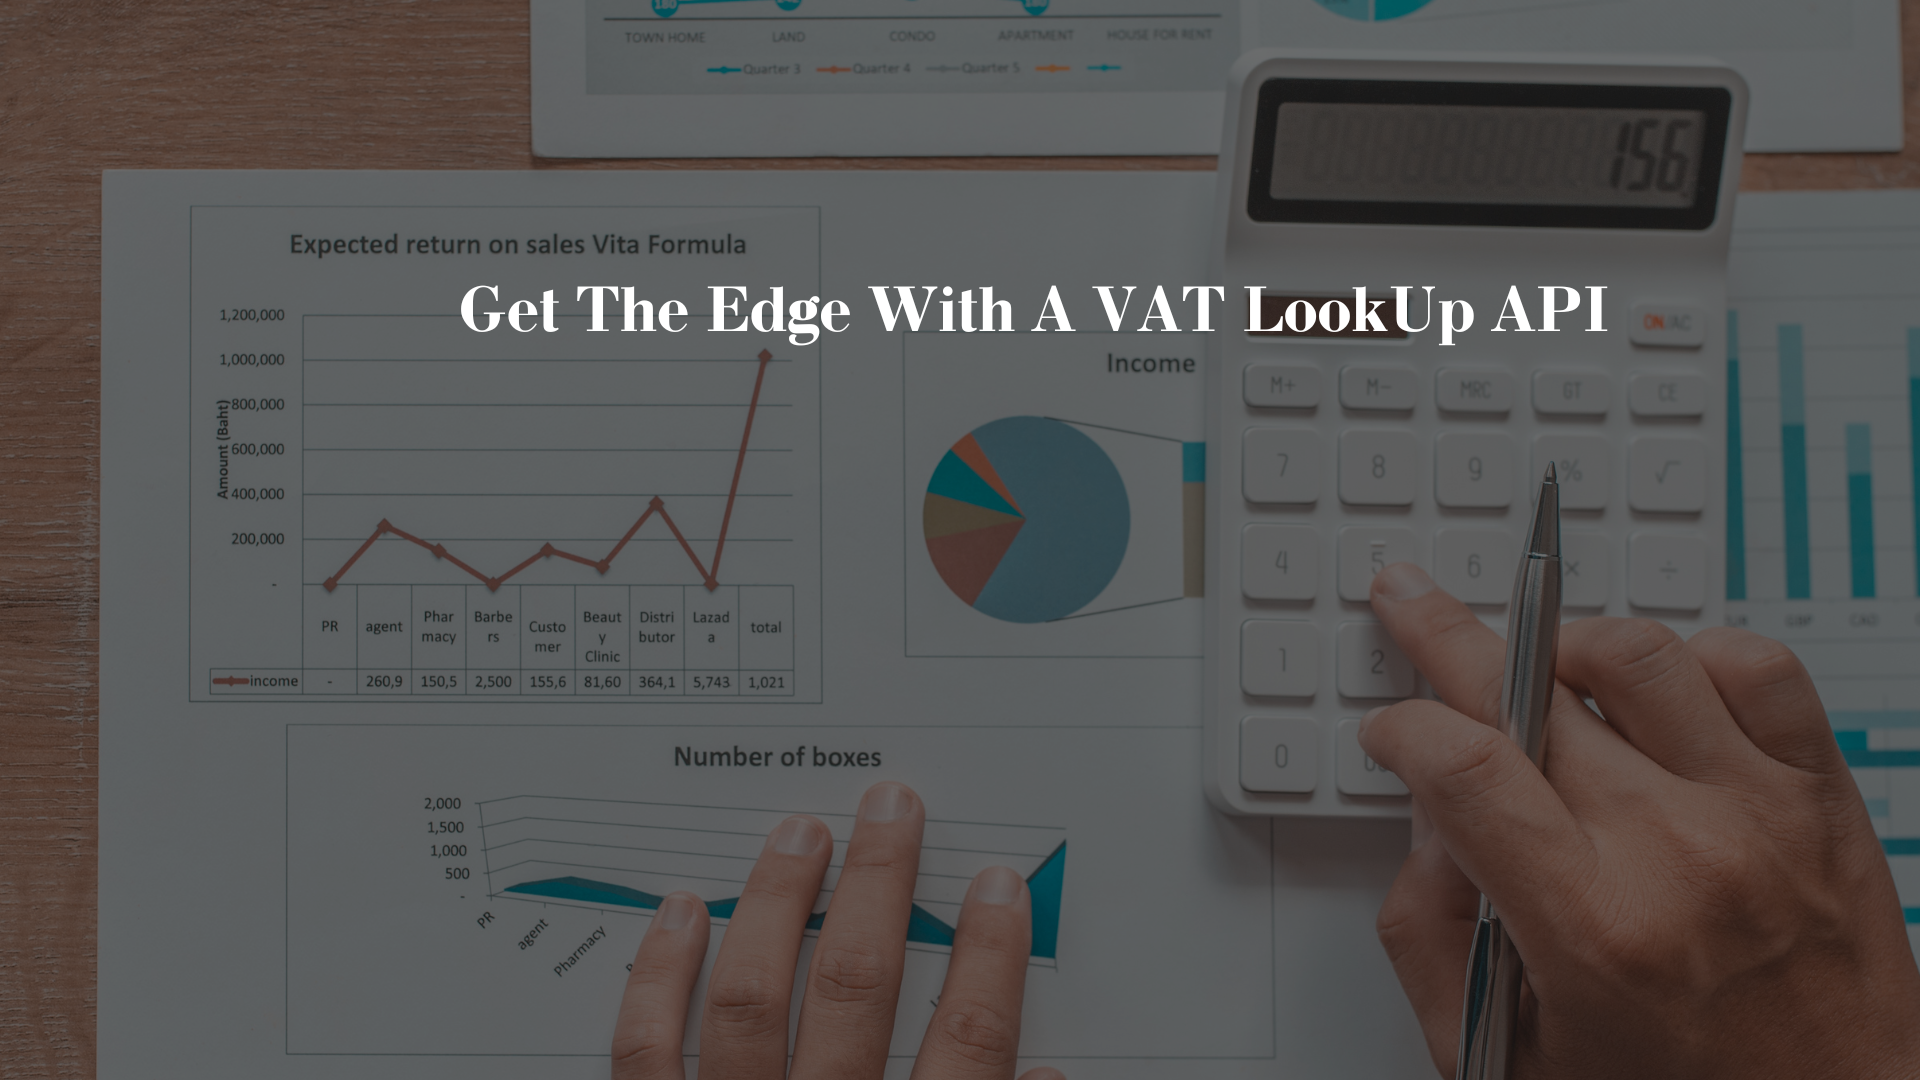 Get The Edge With A VAT LookUp API